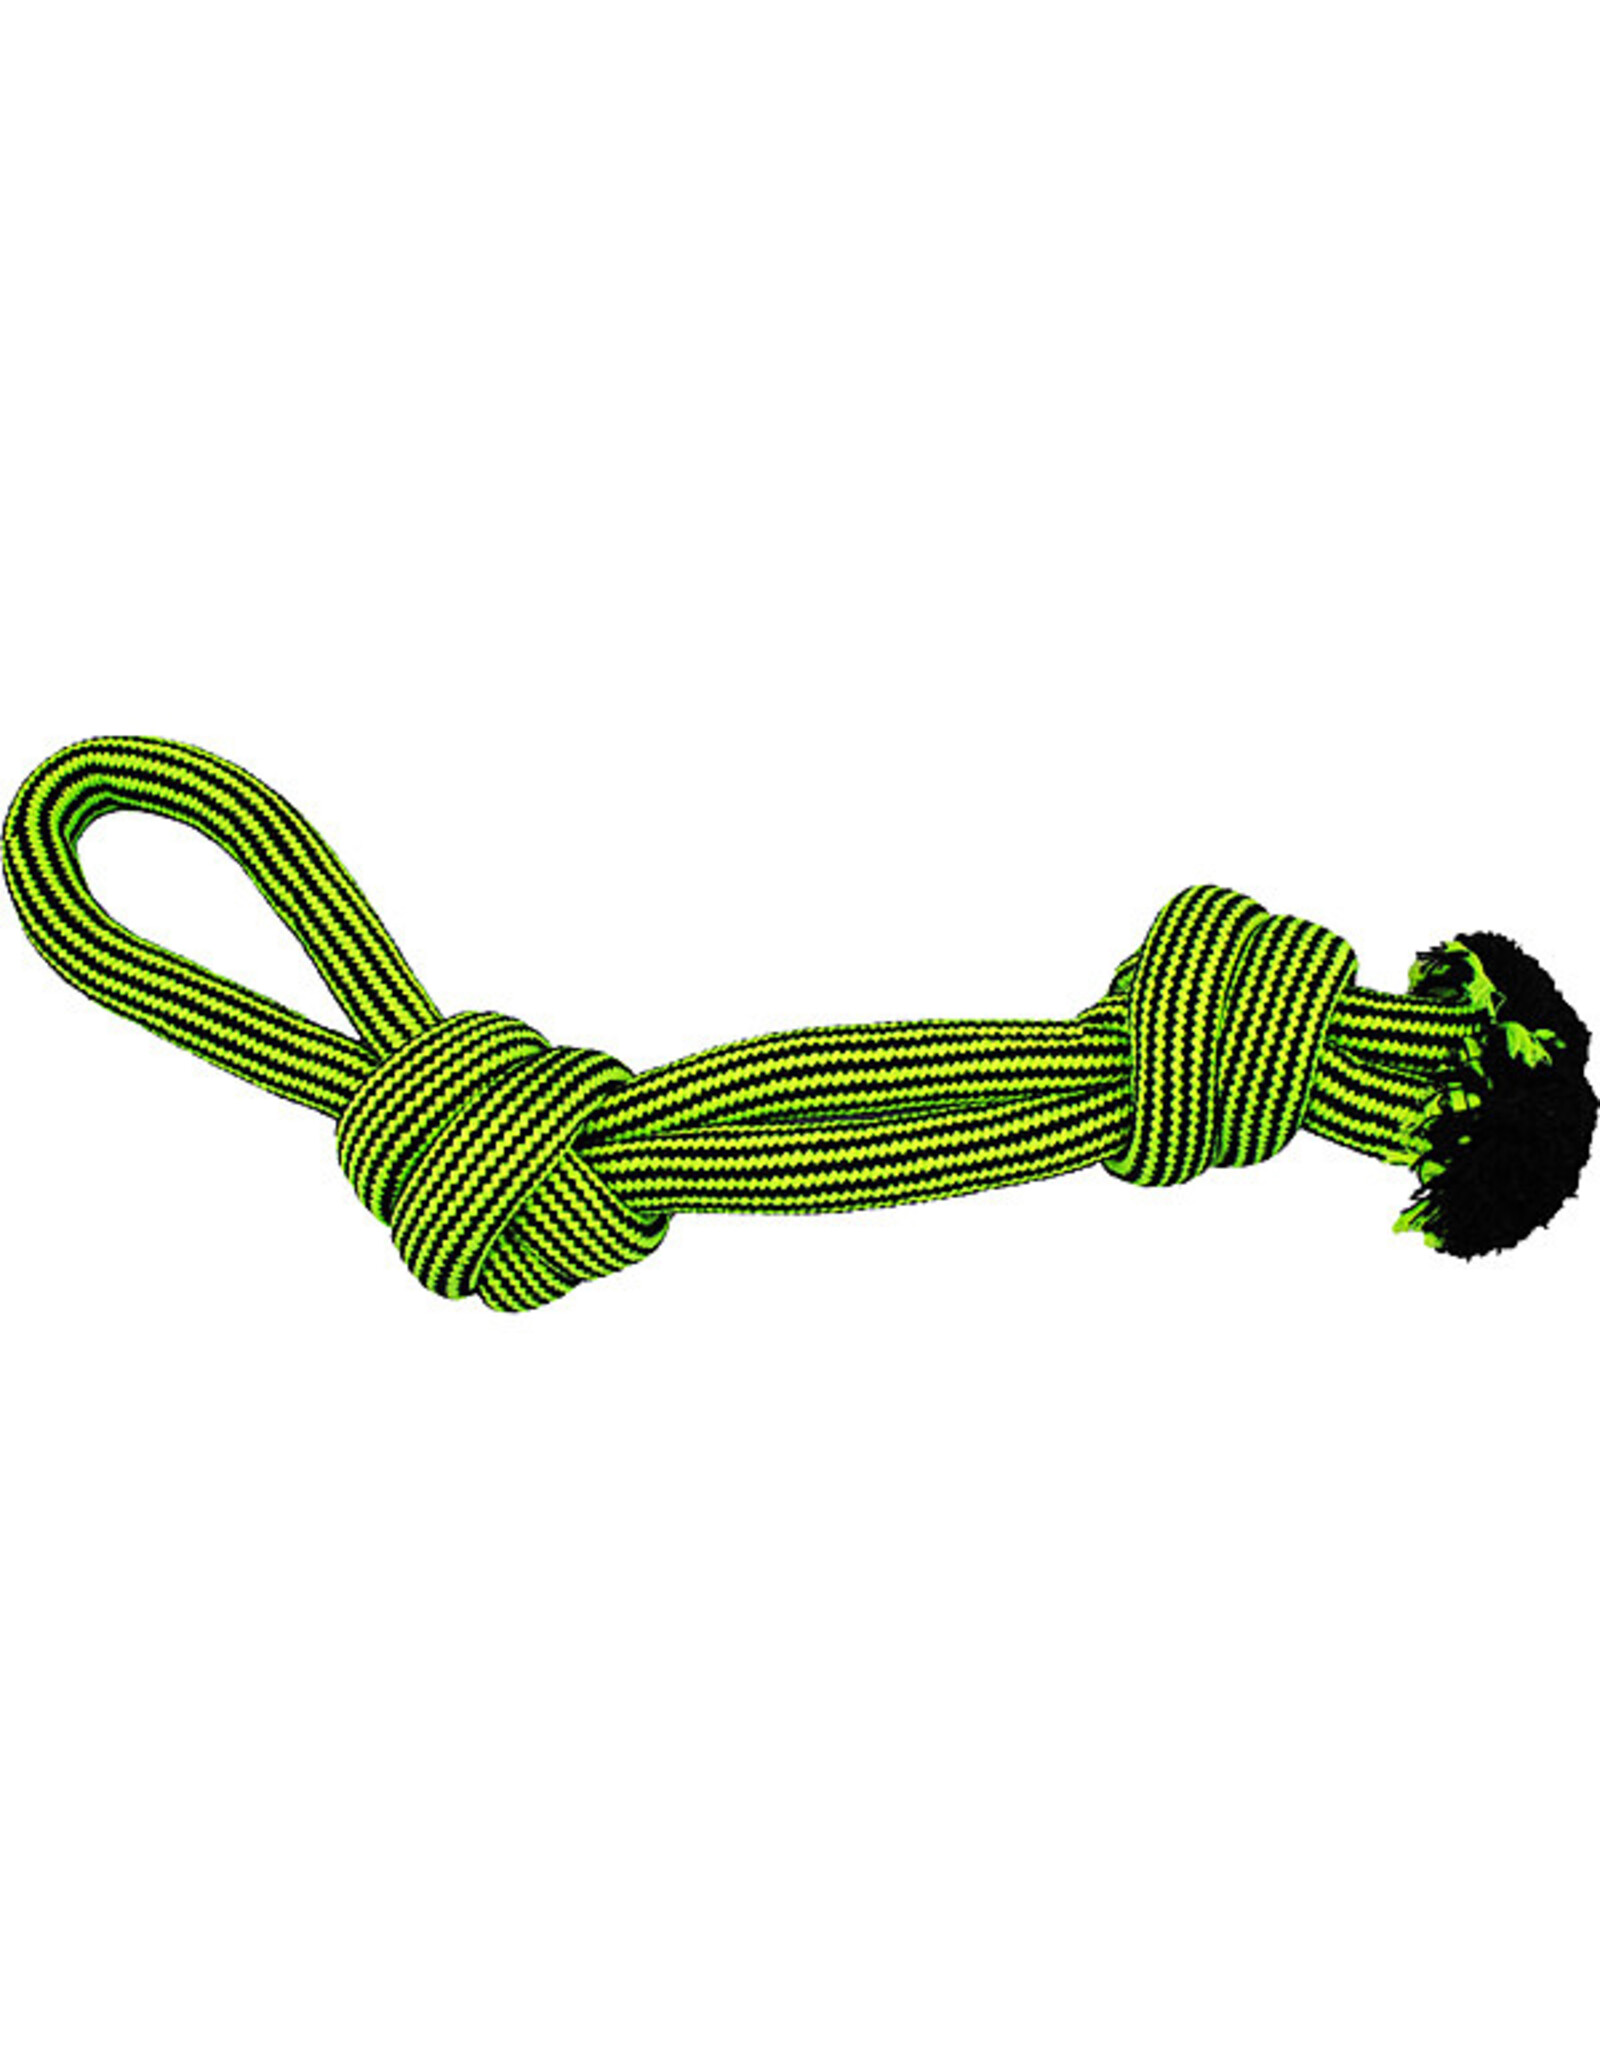 Jolly Pets Knot-n-Chew Large/Extra Large Loop Knot